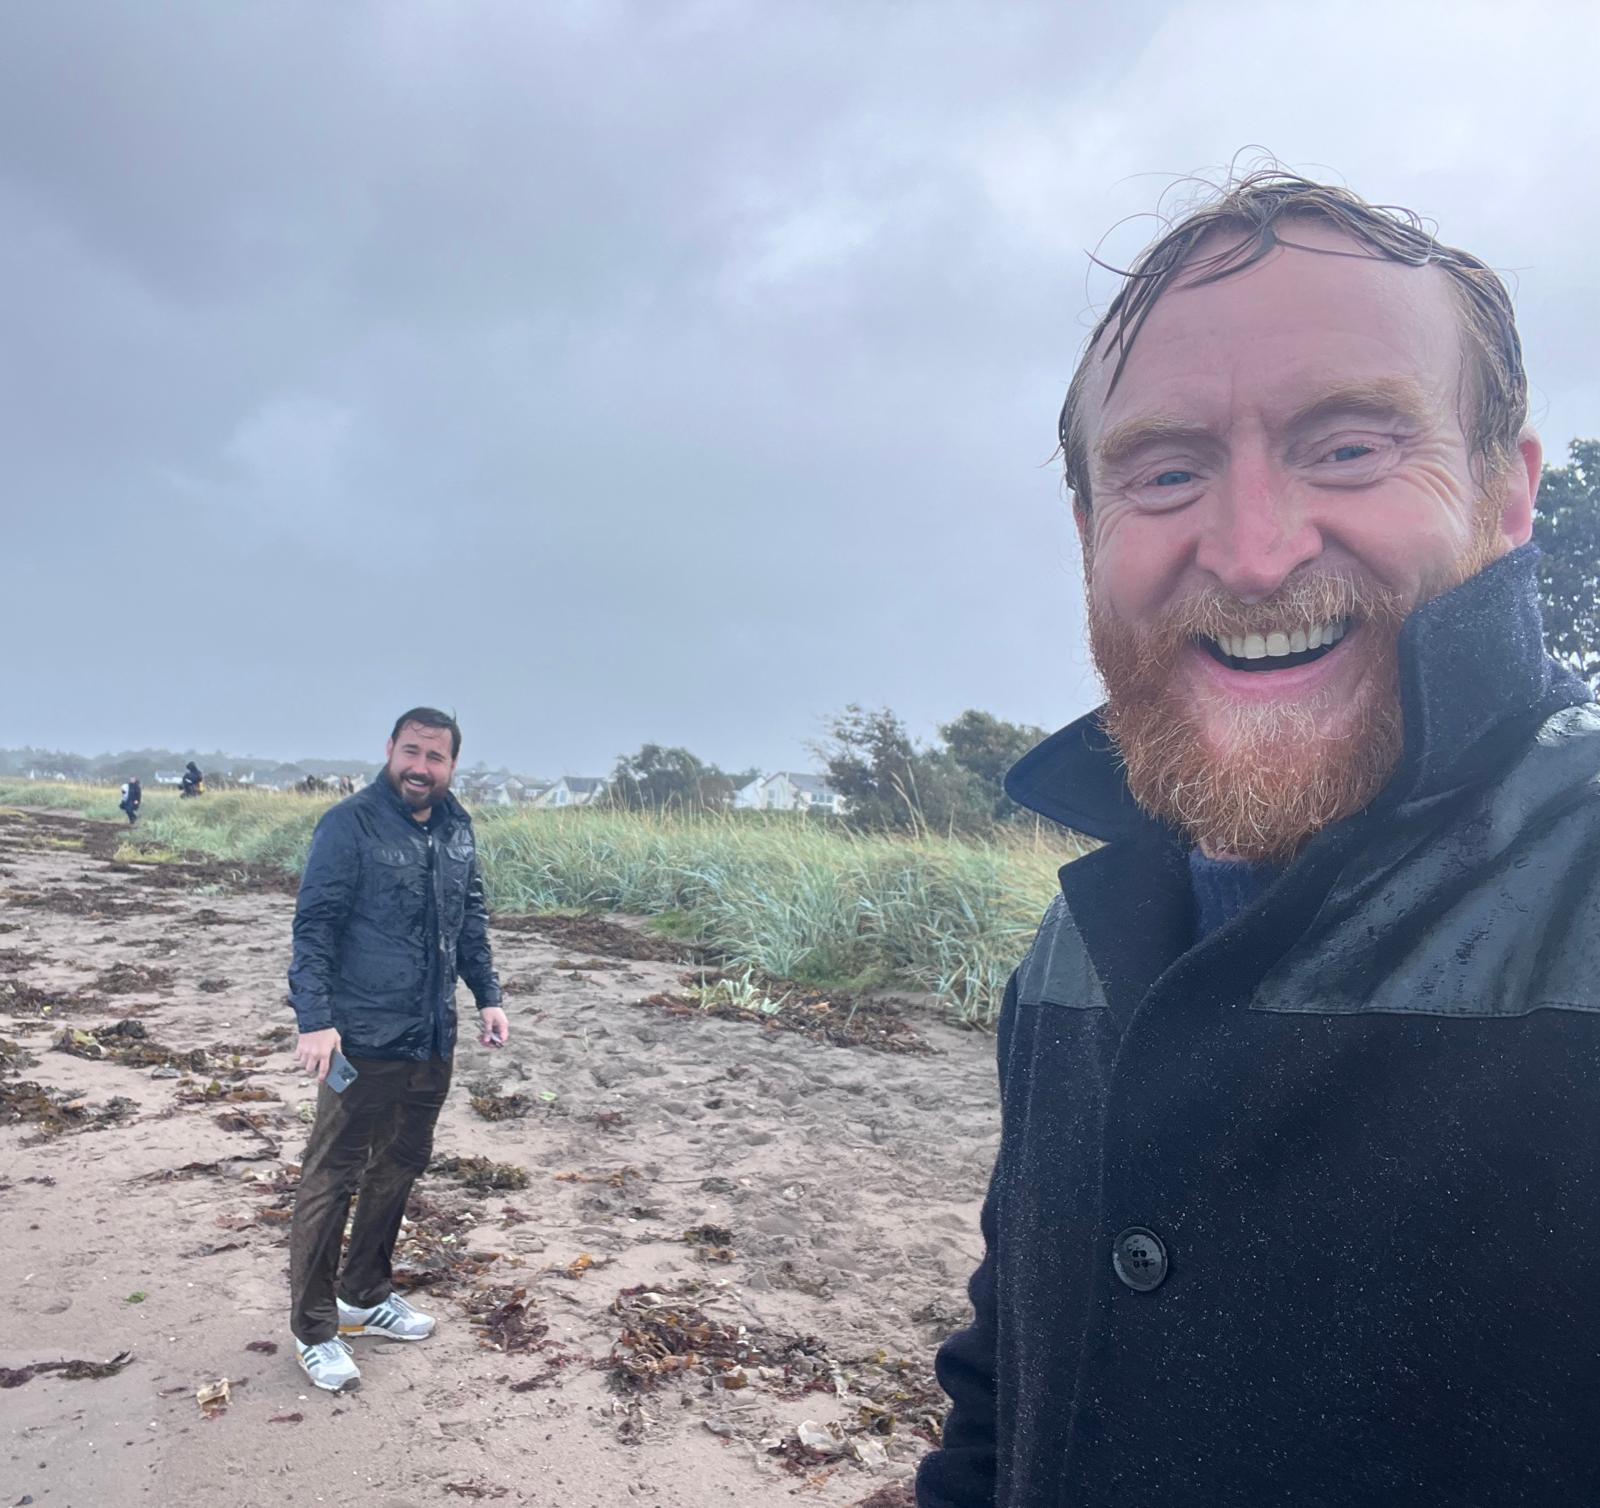 Martin Compston and Tony Curran, soaking wet, on a beach in Scotland filming  Mayflies